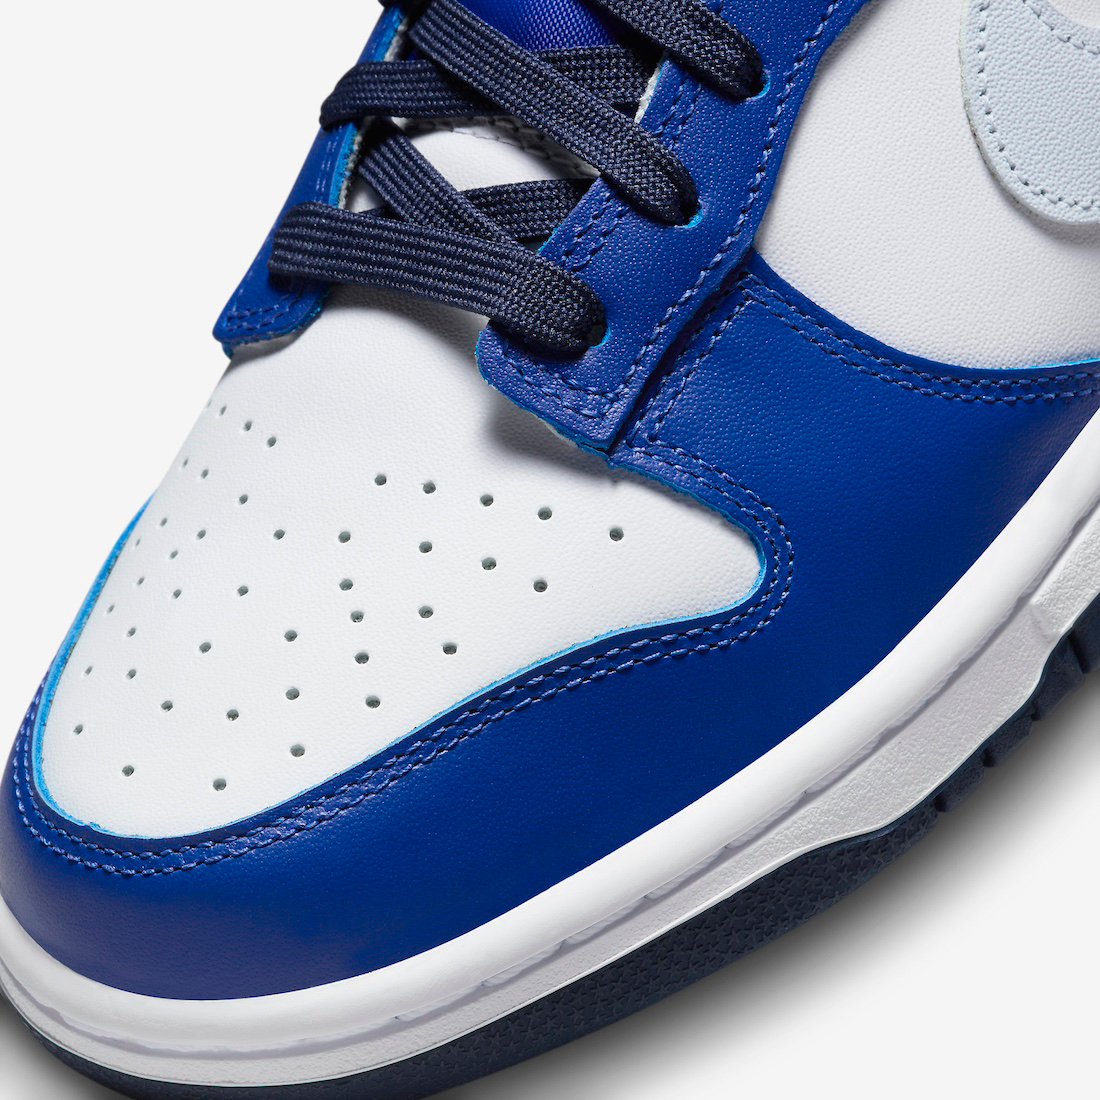 Nike-Dunk-Low-Winter-Blues-Game-Royal-Midnight-Navy-Football-Grey-Release-Date-7